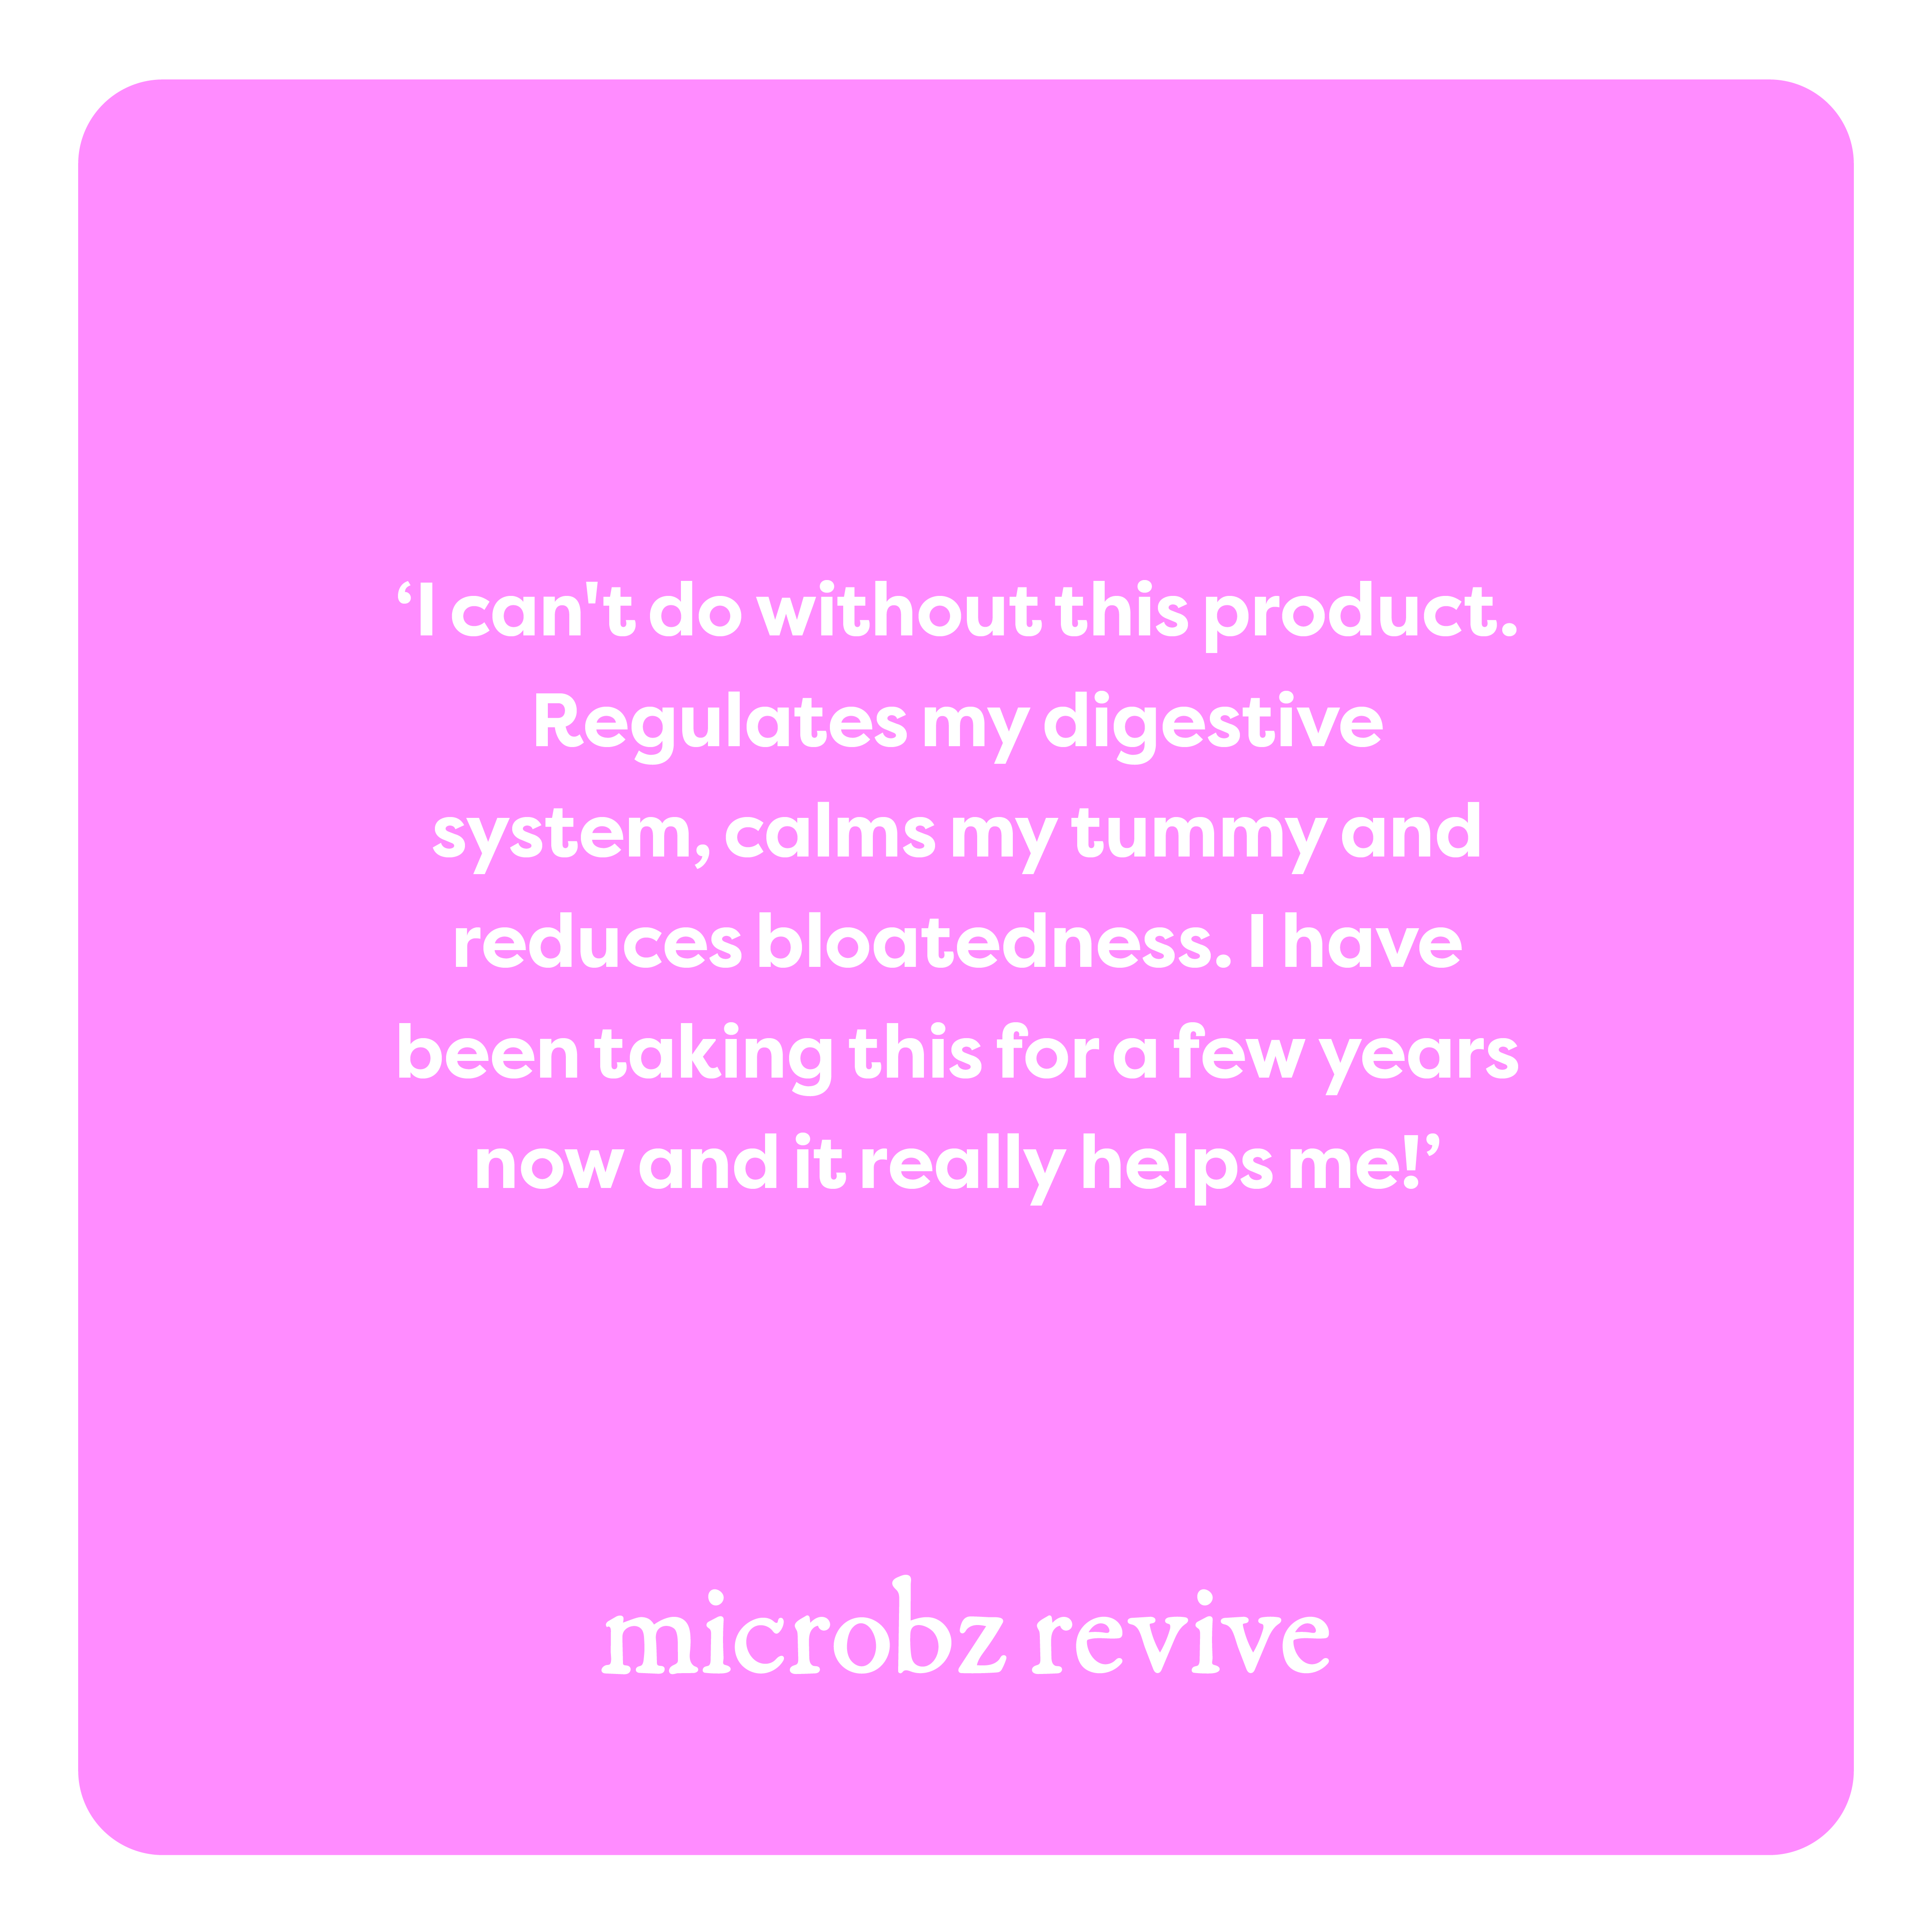 microbz revive review that says I can't do without this product. Regulates my digestive system, calms my tummy and reduces bloatedness. I have been taking this for a few years now and it really helps me